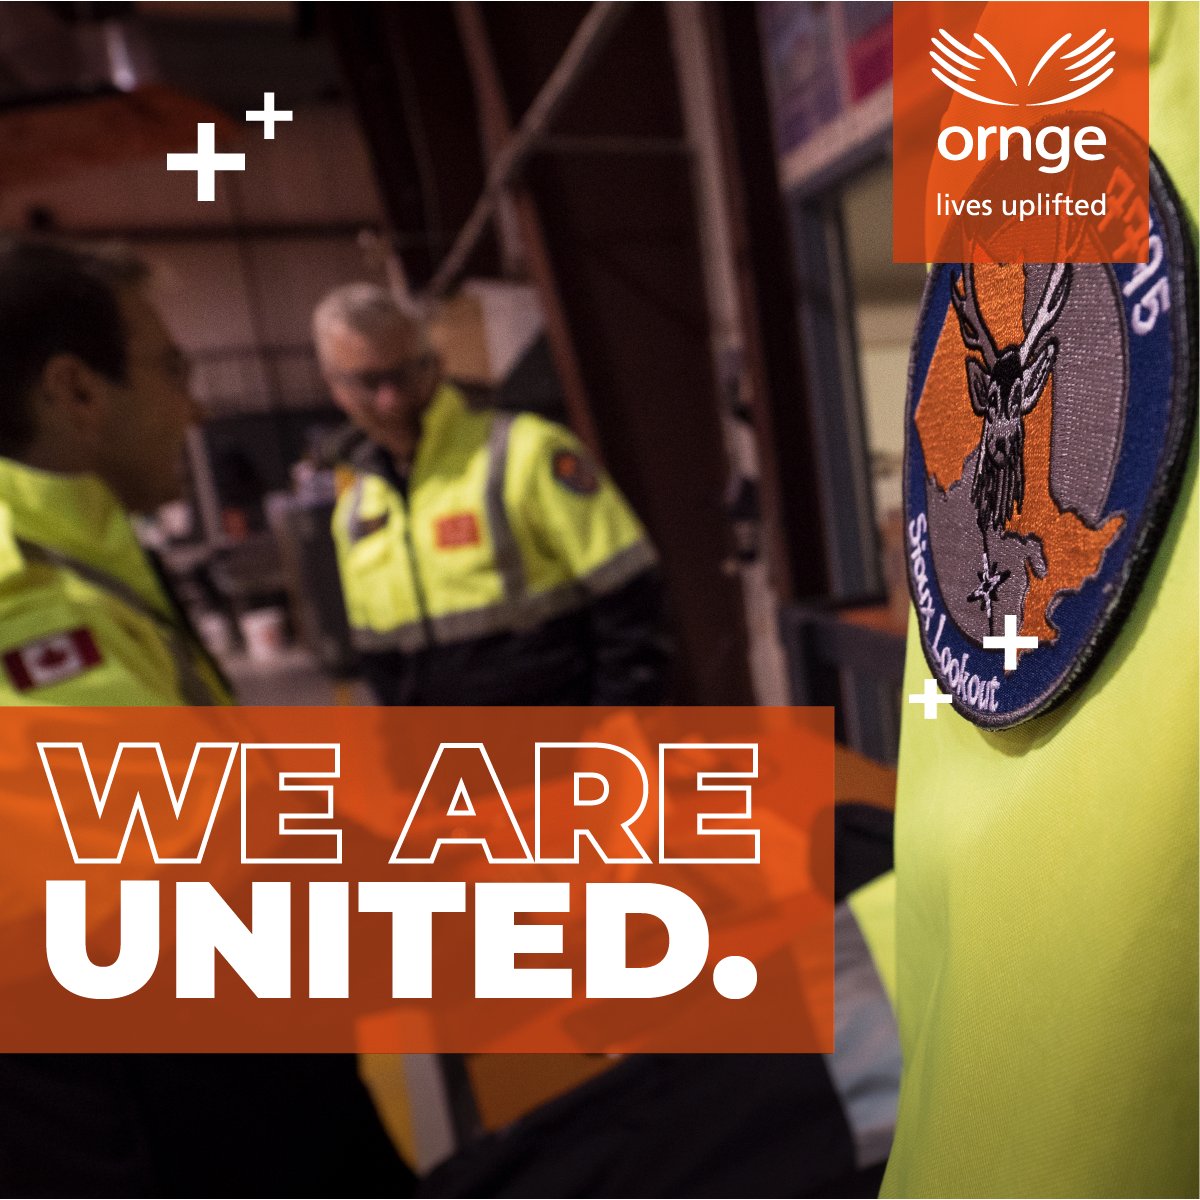 NOW HIRING >> Advanced Care Paramedic (For The Position of CCP Recruit) You're invited to attend a virtual Information and Q&A session to learn more about the role and working at Ornge on April 3 at 3:00 p.m. EDT: bit.ly/CCPInfoApr3 #medevac #airambulance #LivesUplifted